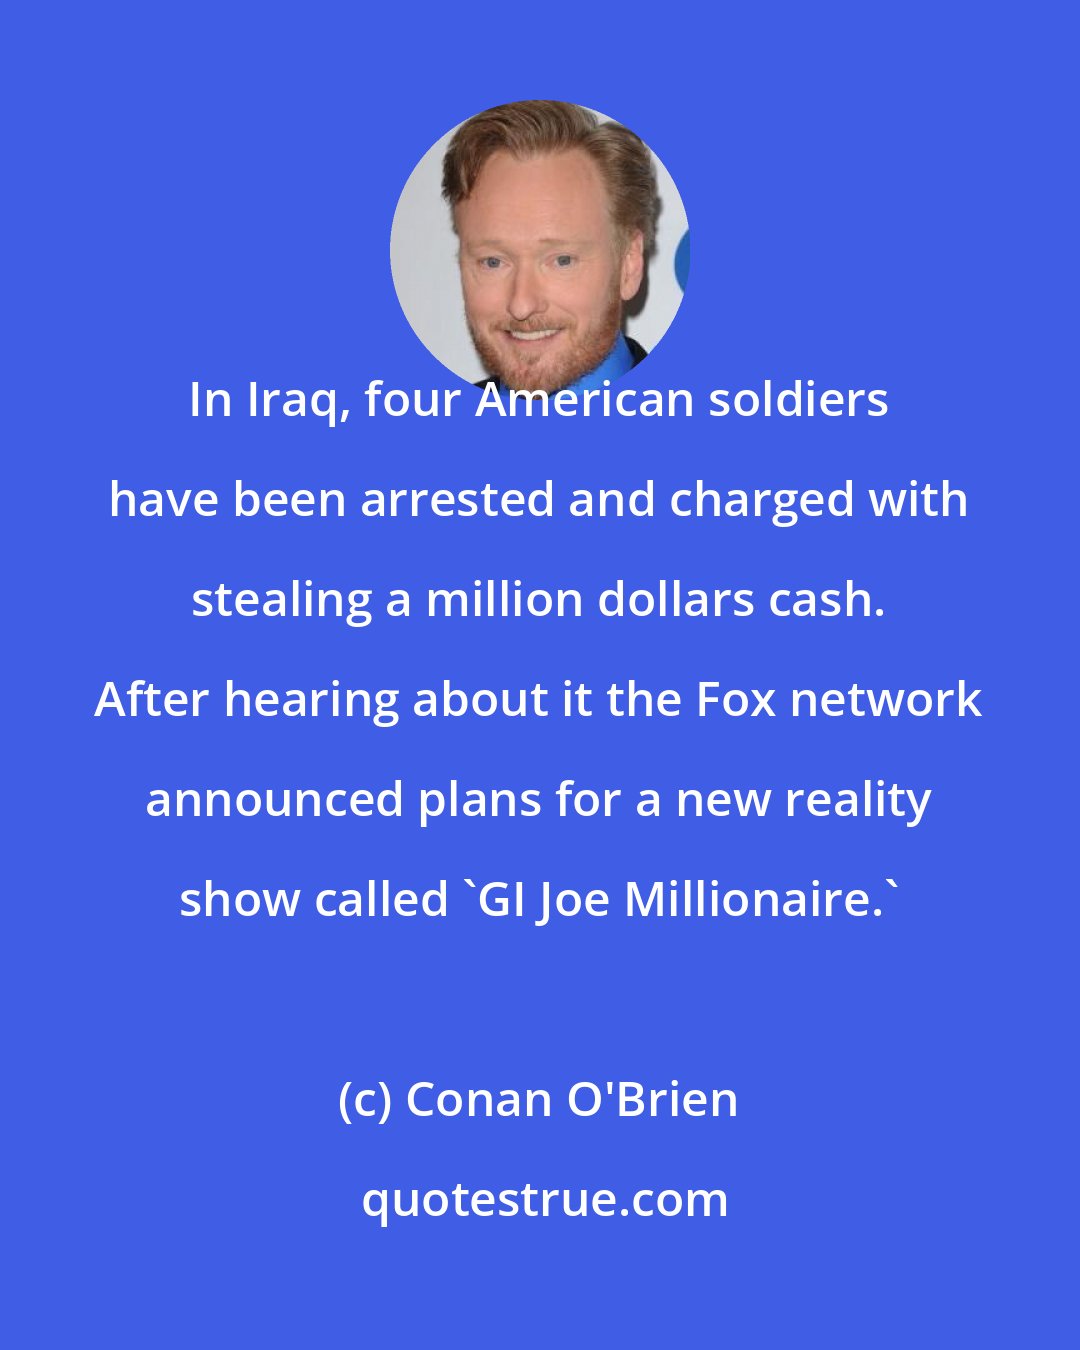 Conan O'Brien: In Iraq, four American soldiers have been arrested and charged with stealing a million dollars cash. After hearing about it the Fox network announced plans for a new reality show called 'GI Joe Millionaire.'